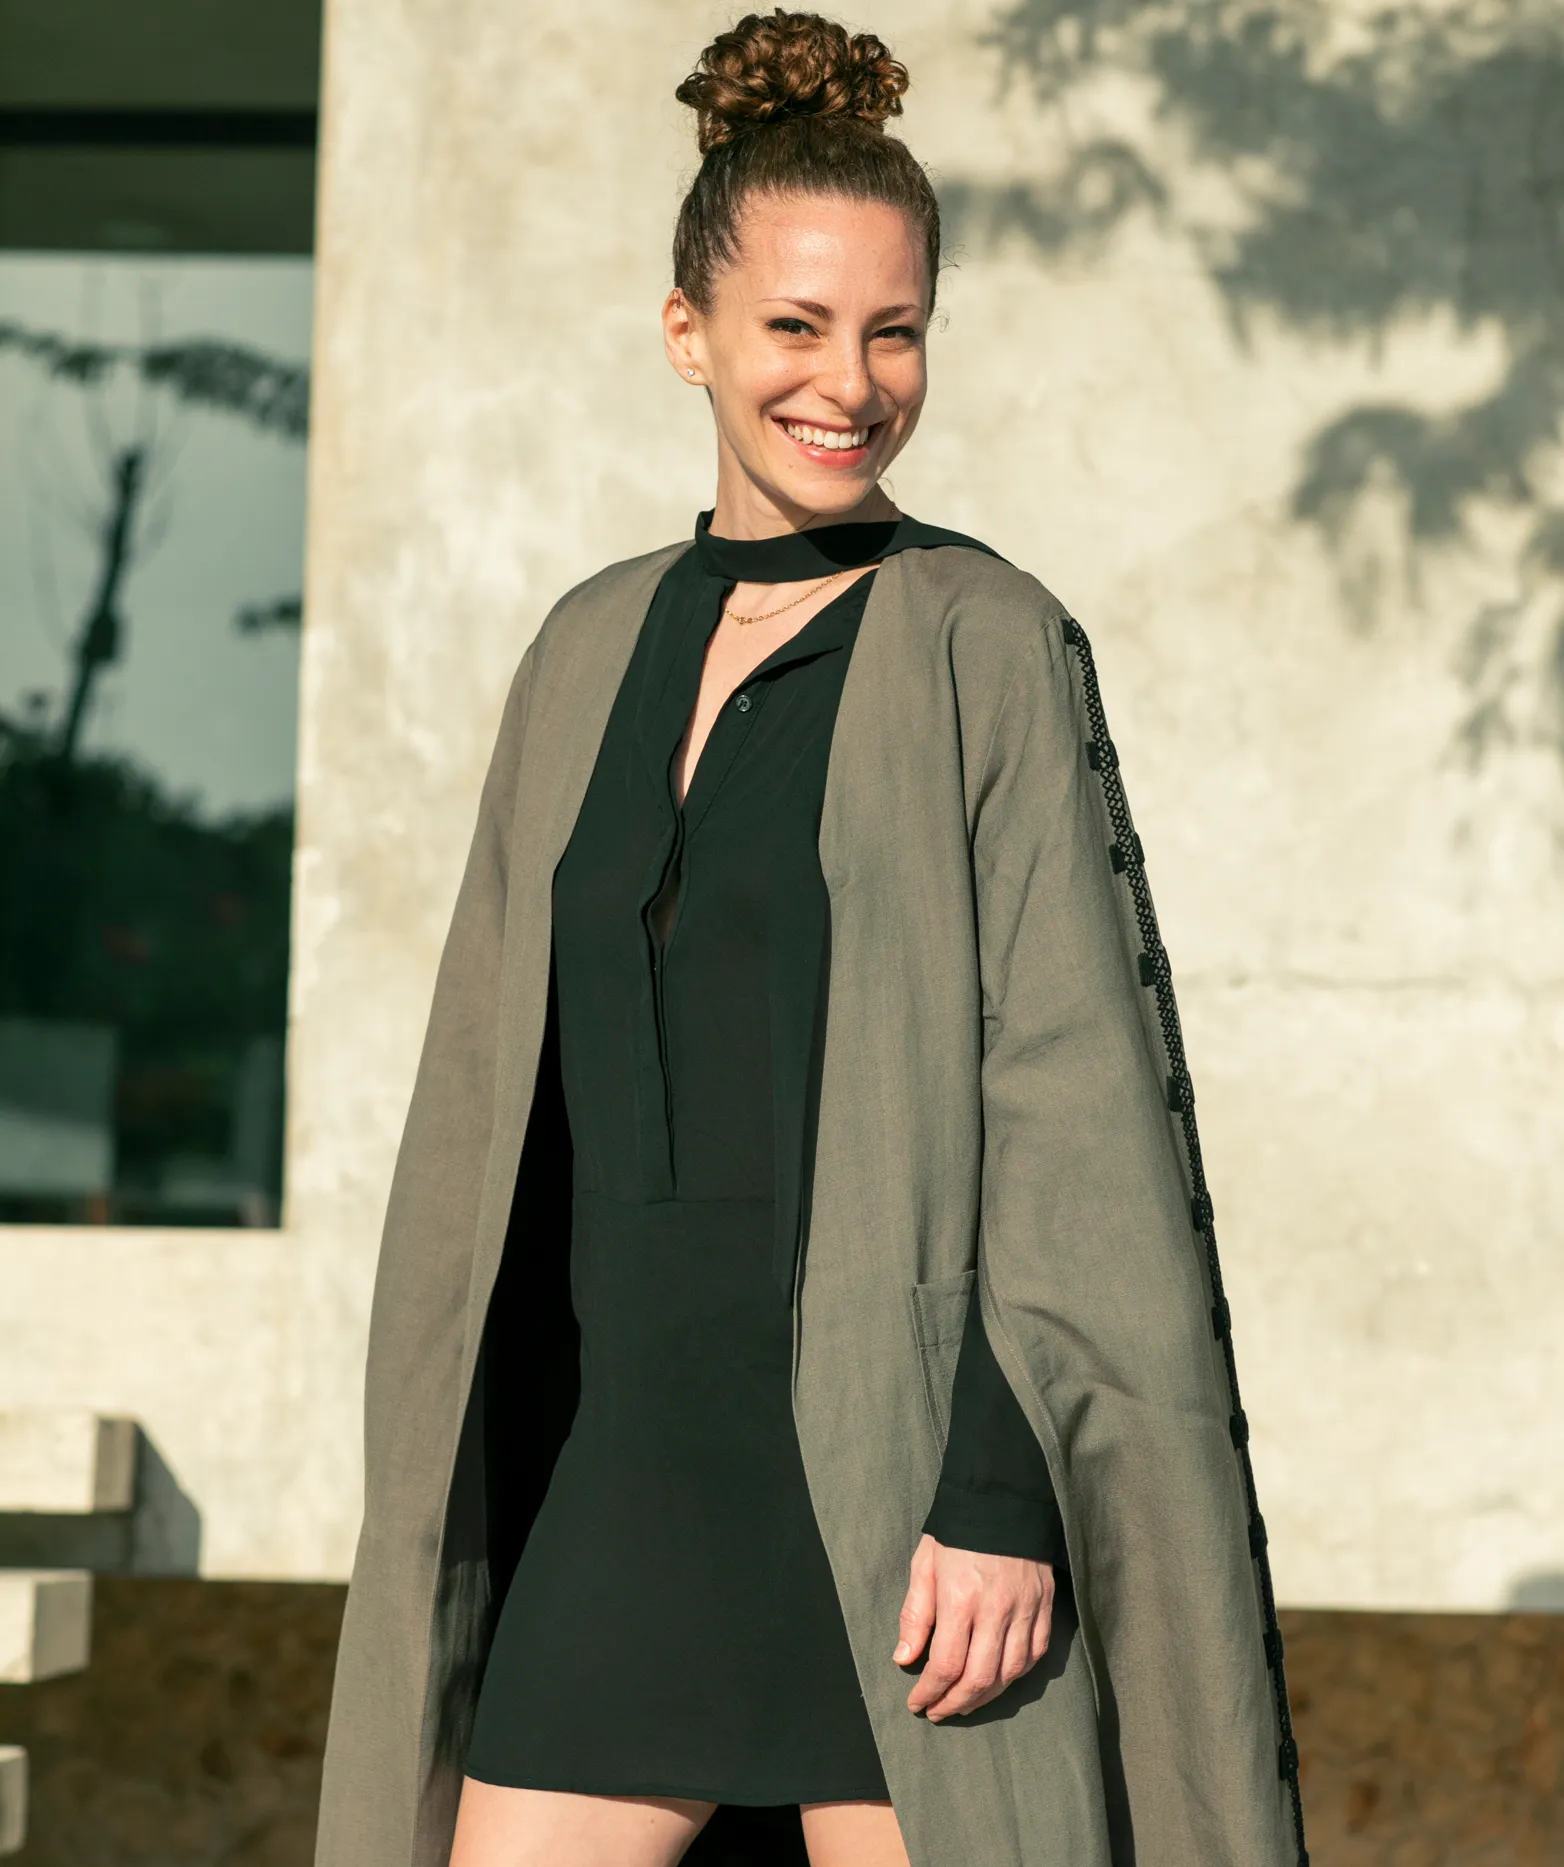 Krystal Ariel smiling confidently, dressed in a stylish black dress and gray coat, embodying her diverse experiences from yoga to digital marketing